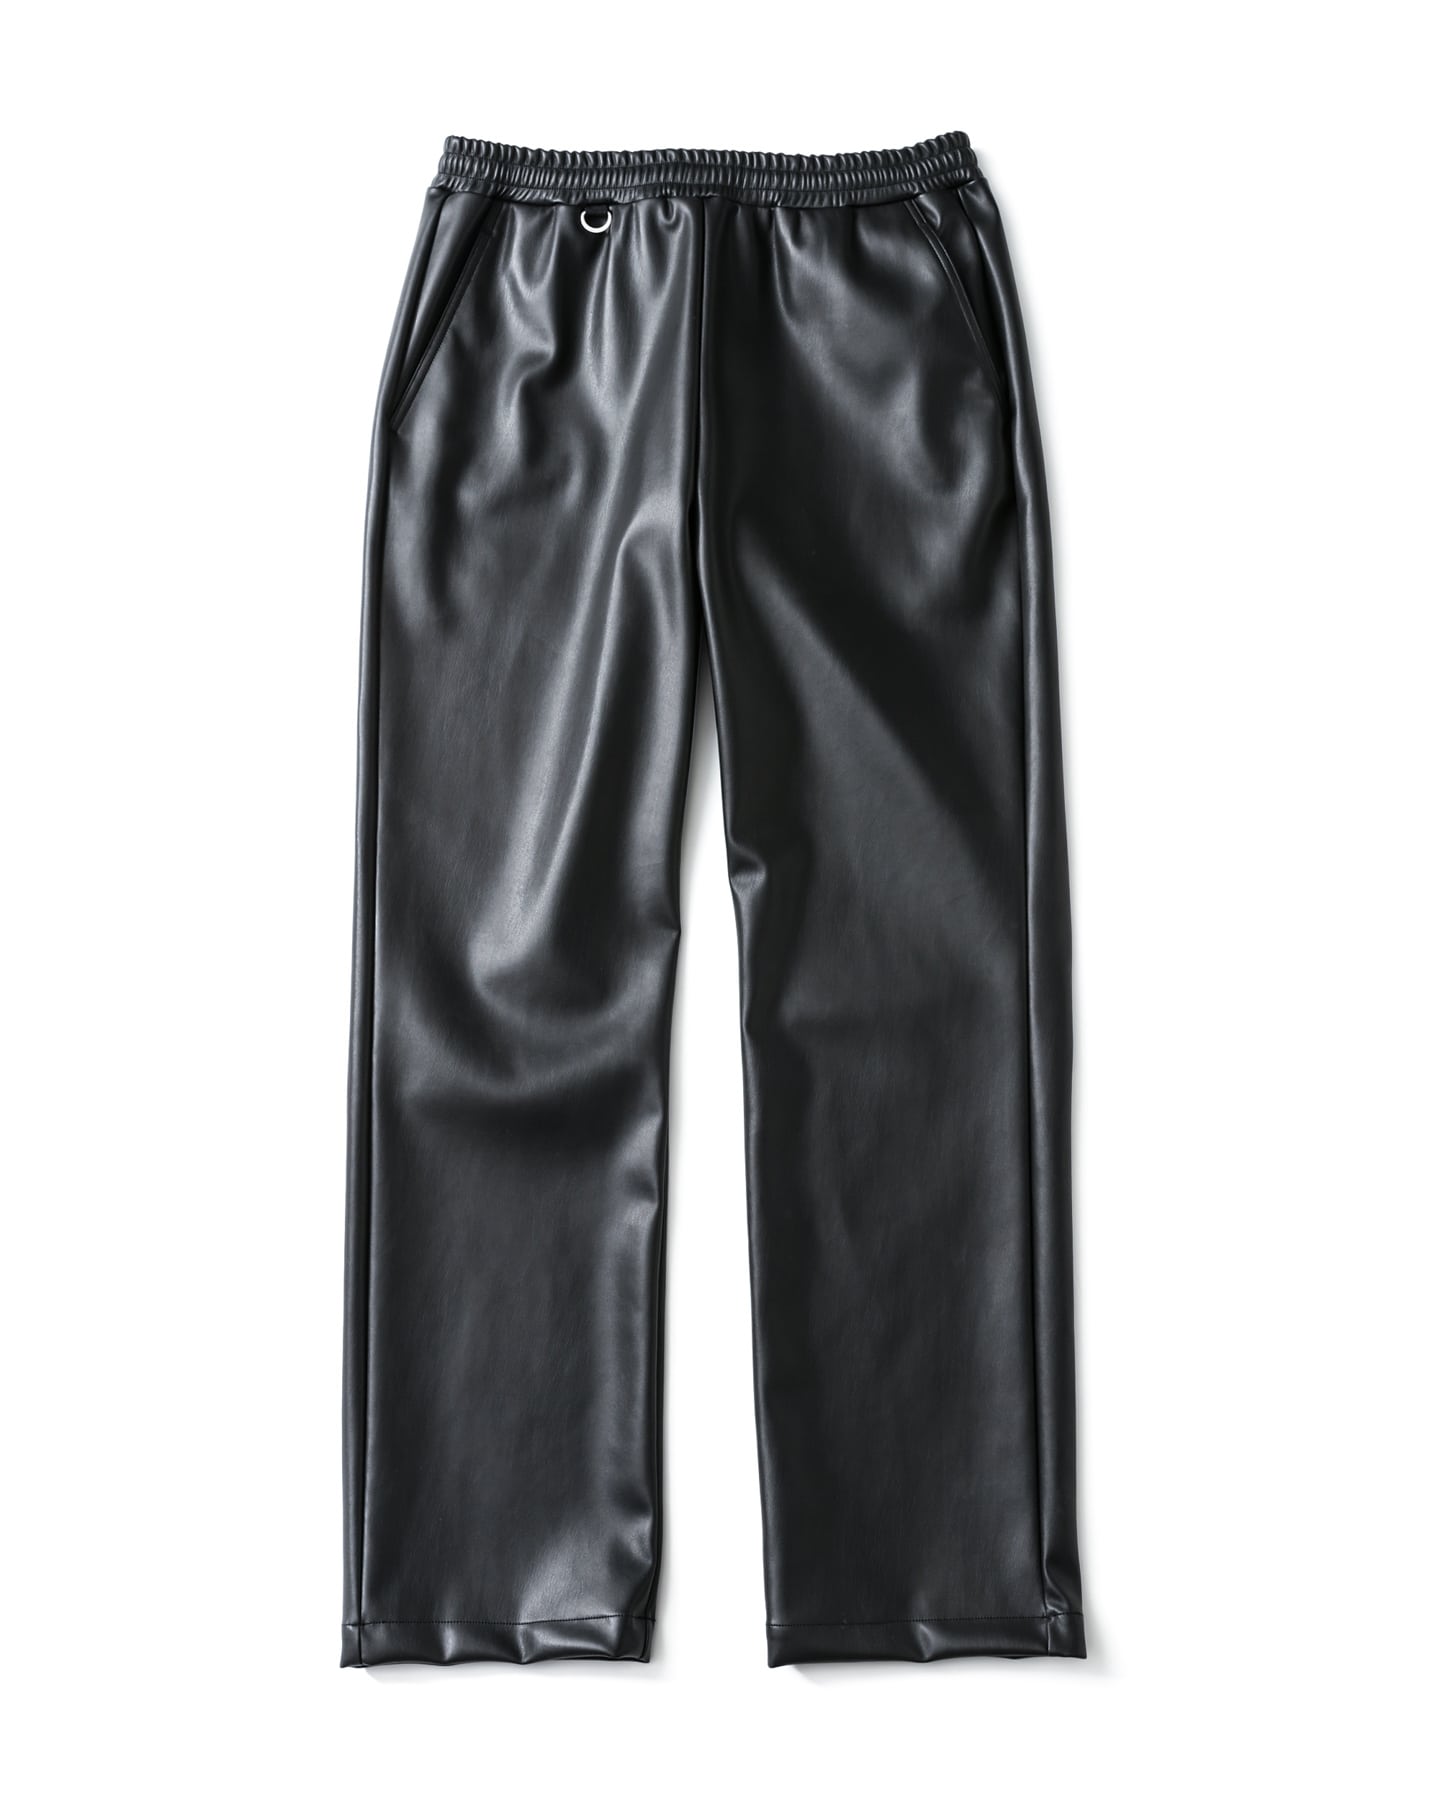 SOPH. | SUSTAINABLE LEATHER STANDARD EASY PANTS(S BLACK):